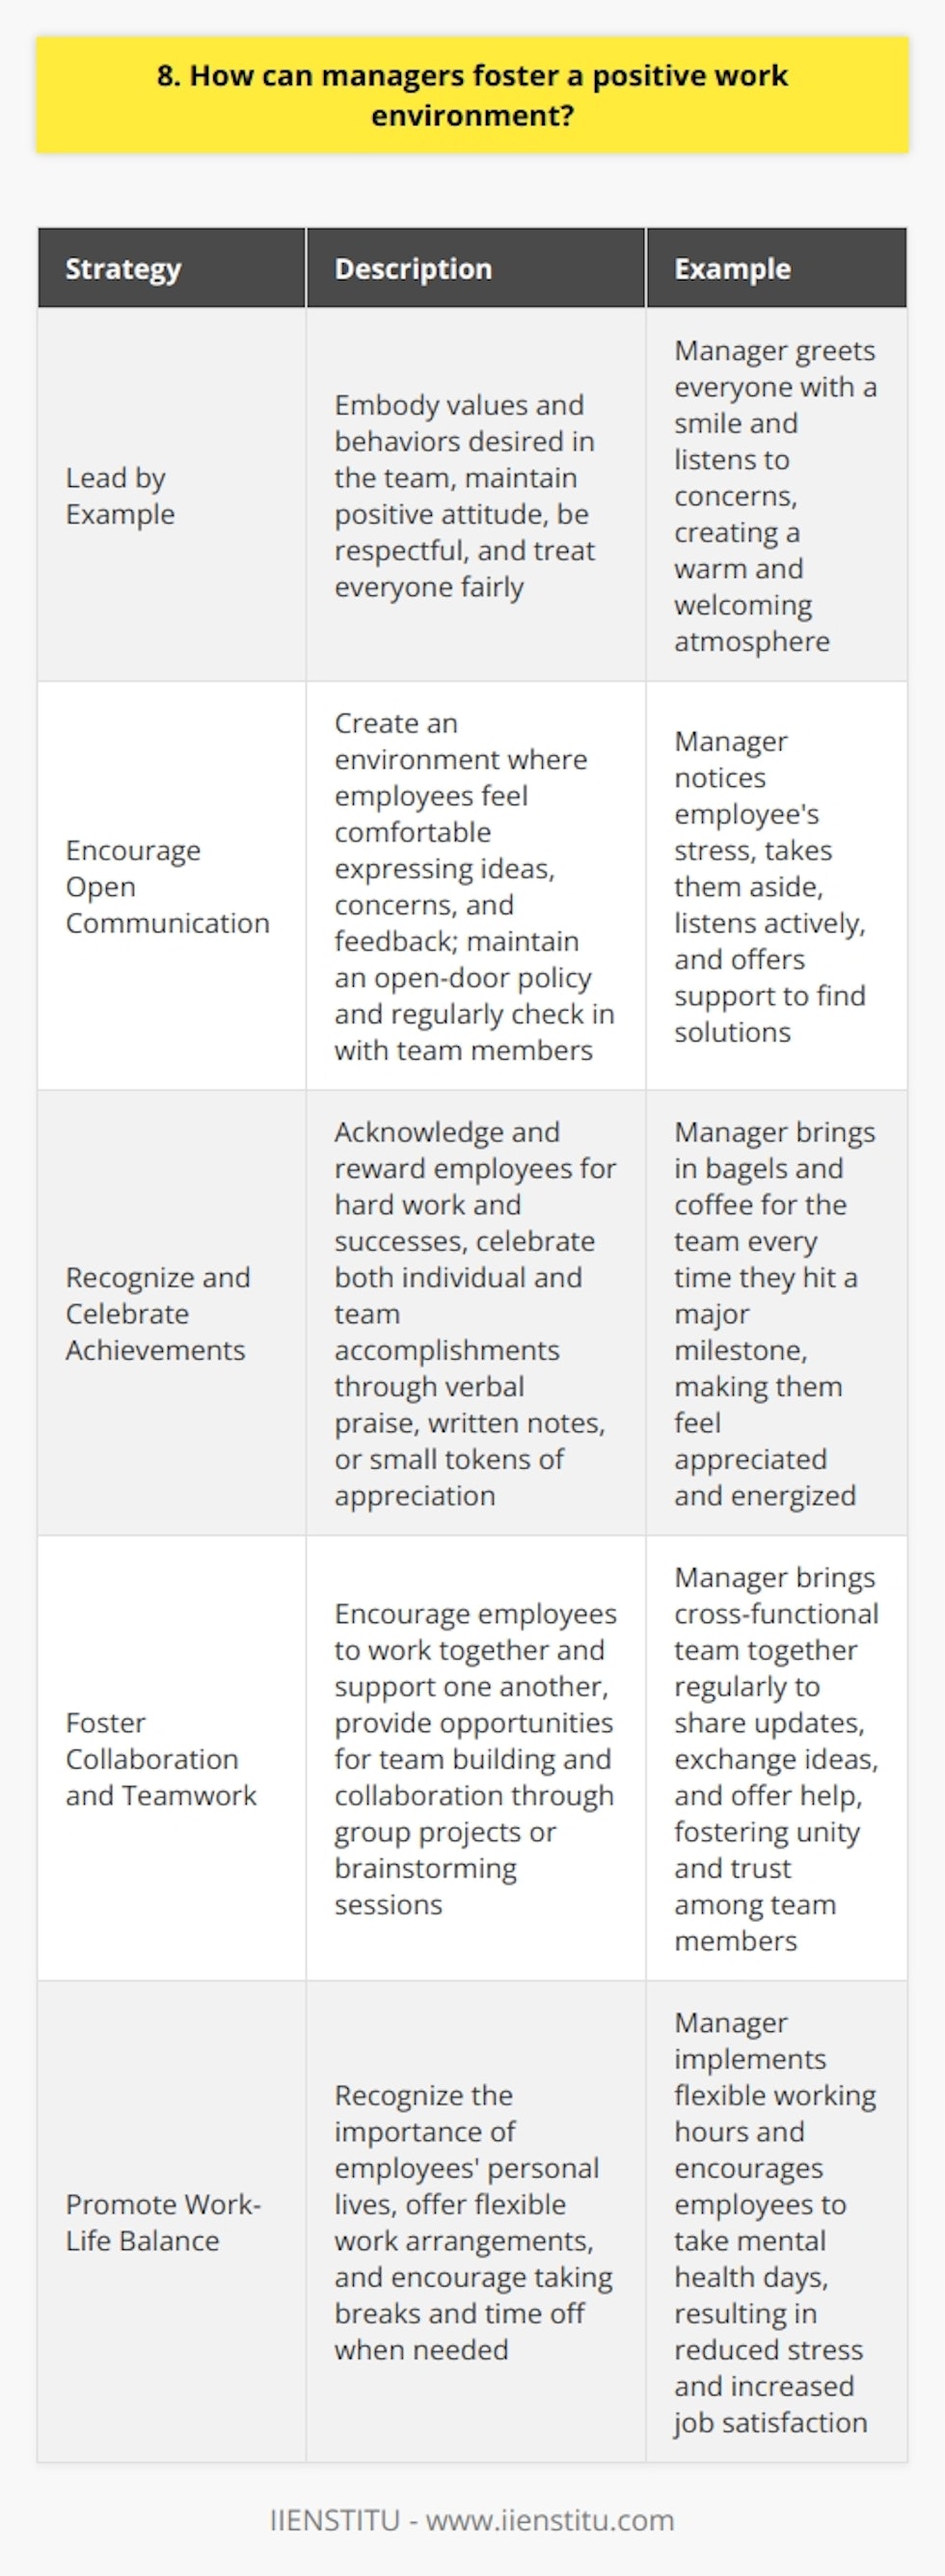 As a manager, fostering a positive work environment is crucial for employee satisfaction and productivity. Here are some strategies I believe can help: Lead by Example Managers should embody the values and behaviors they want to see in their team. By maintaining a positive attitude, being respectful, and treating everyone fairly, managers set the tone for the entire workplace. When I was working at my previous company, my manager always greeted everyone with a smile and took the time to listen to our concerns. This created a warm and welcoming atmosphere that made us feel valued and motivated to do our best work. Encourage Open Communication Creating an environment where employees feel comfortable expressing their ideas, concerns, and feedback is essential. Managers should have an open-door policy and regularly check in with their team members. I remember a time when I was feeling overwhelmed with my workload, and my manager noticed my stress. She took me aside and asked me what was going on. By actively listening and offering support, she helped me find solutions and feel more at ease. Recognize and Celebrate Achievements Acknowledging and rewarding employees for their hard work and successes can boost morale and motivation. Managers should make a point to celebrate both individual and team accomplishments, no matter how small. This could be through verbal praise, written notes, or even small tokens of appreciation. I once had a manager who would bring in bagels and coffee for the team every time we hit a major milestone. It was a simple gesture, but it made us feel appreciated and energized to keep pushing forward. Foster Collaboration and Teamwork Encouraging employees to work together and support one another can create a sense of camaraderie and shared purpose. Managers should provide opportunities for team building and collaboration, such as group projects or brainstorming sessions. When I was part of a cross-functional team working on a complex project, my manager made sure to bring us together regularly to share updates, exchange ideas, and offer help where needed. This fostered a strong sense of unity and trust among team members, which ultimately led to the projects success. By implementing these strategies, managers can create a positive work environment that promotes employee well-being, engagement, and productivity.